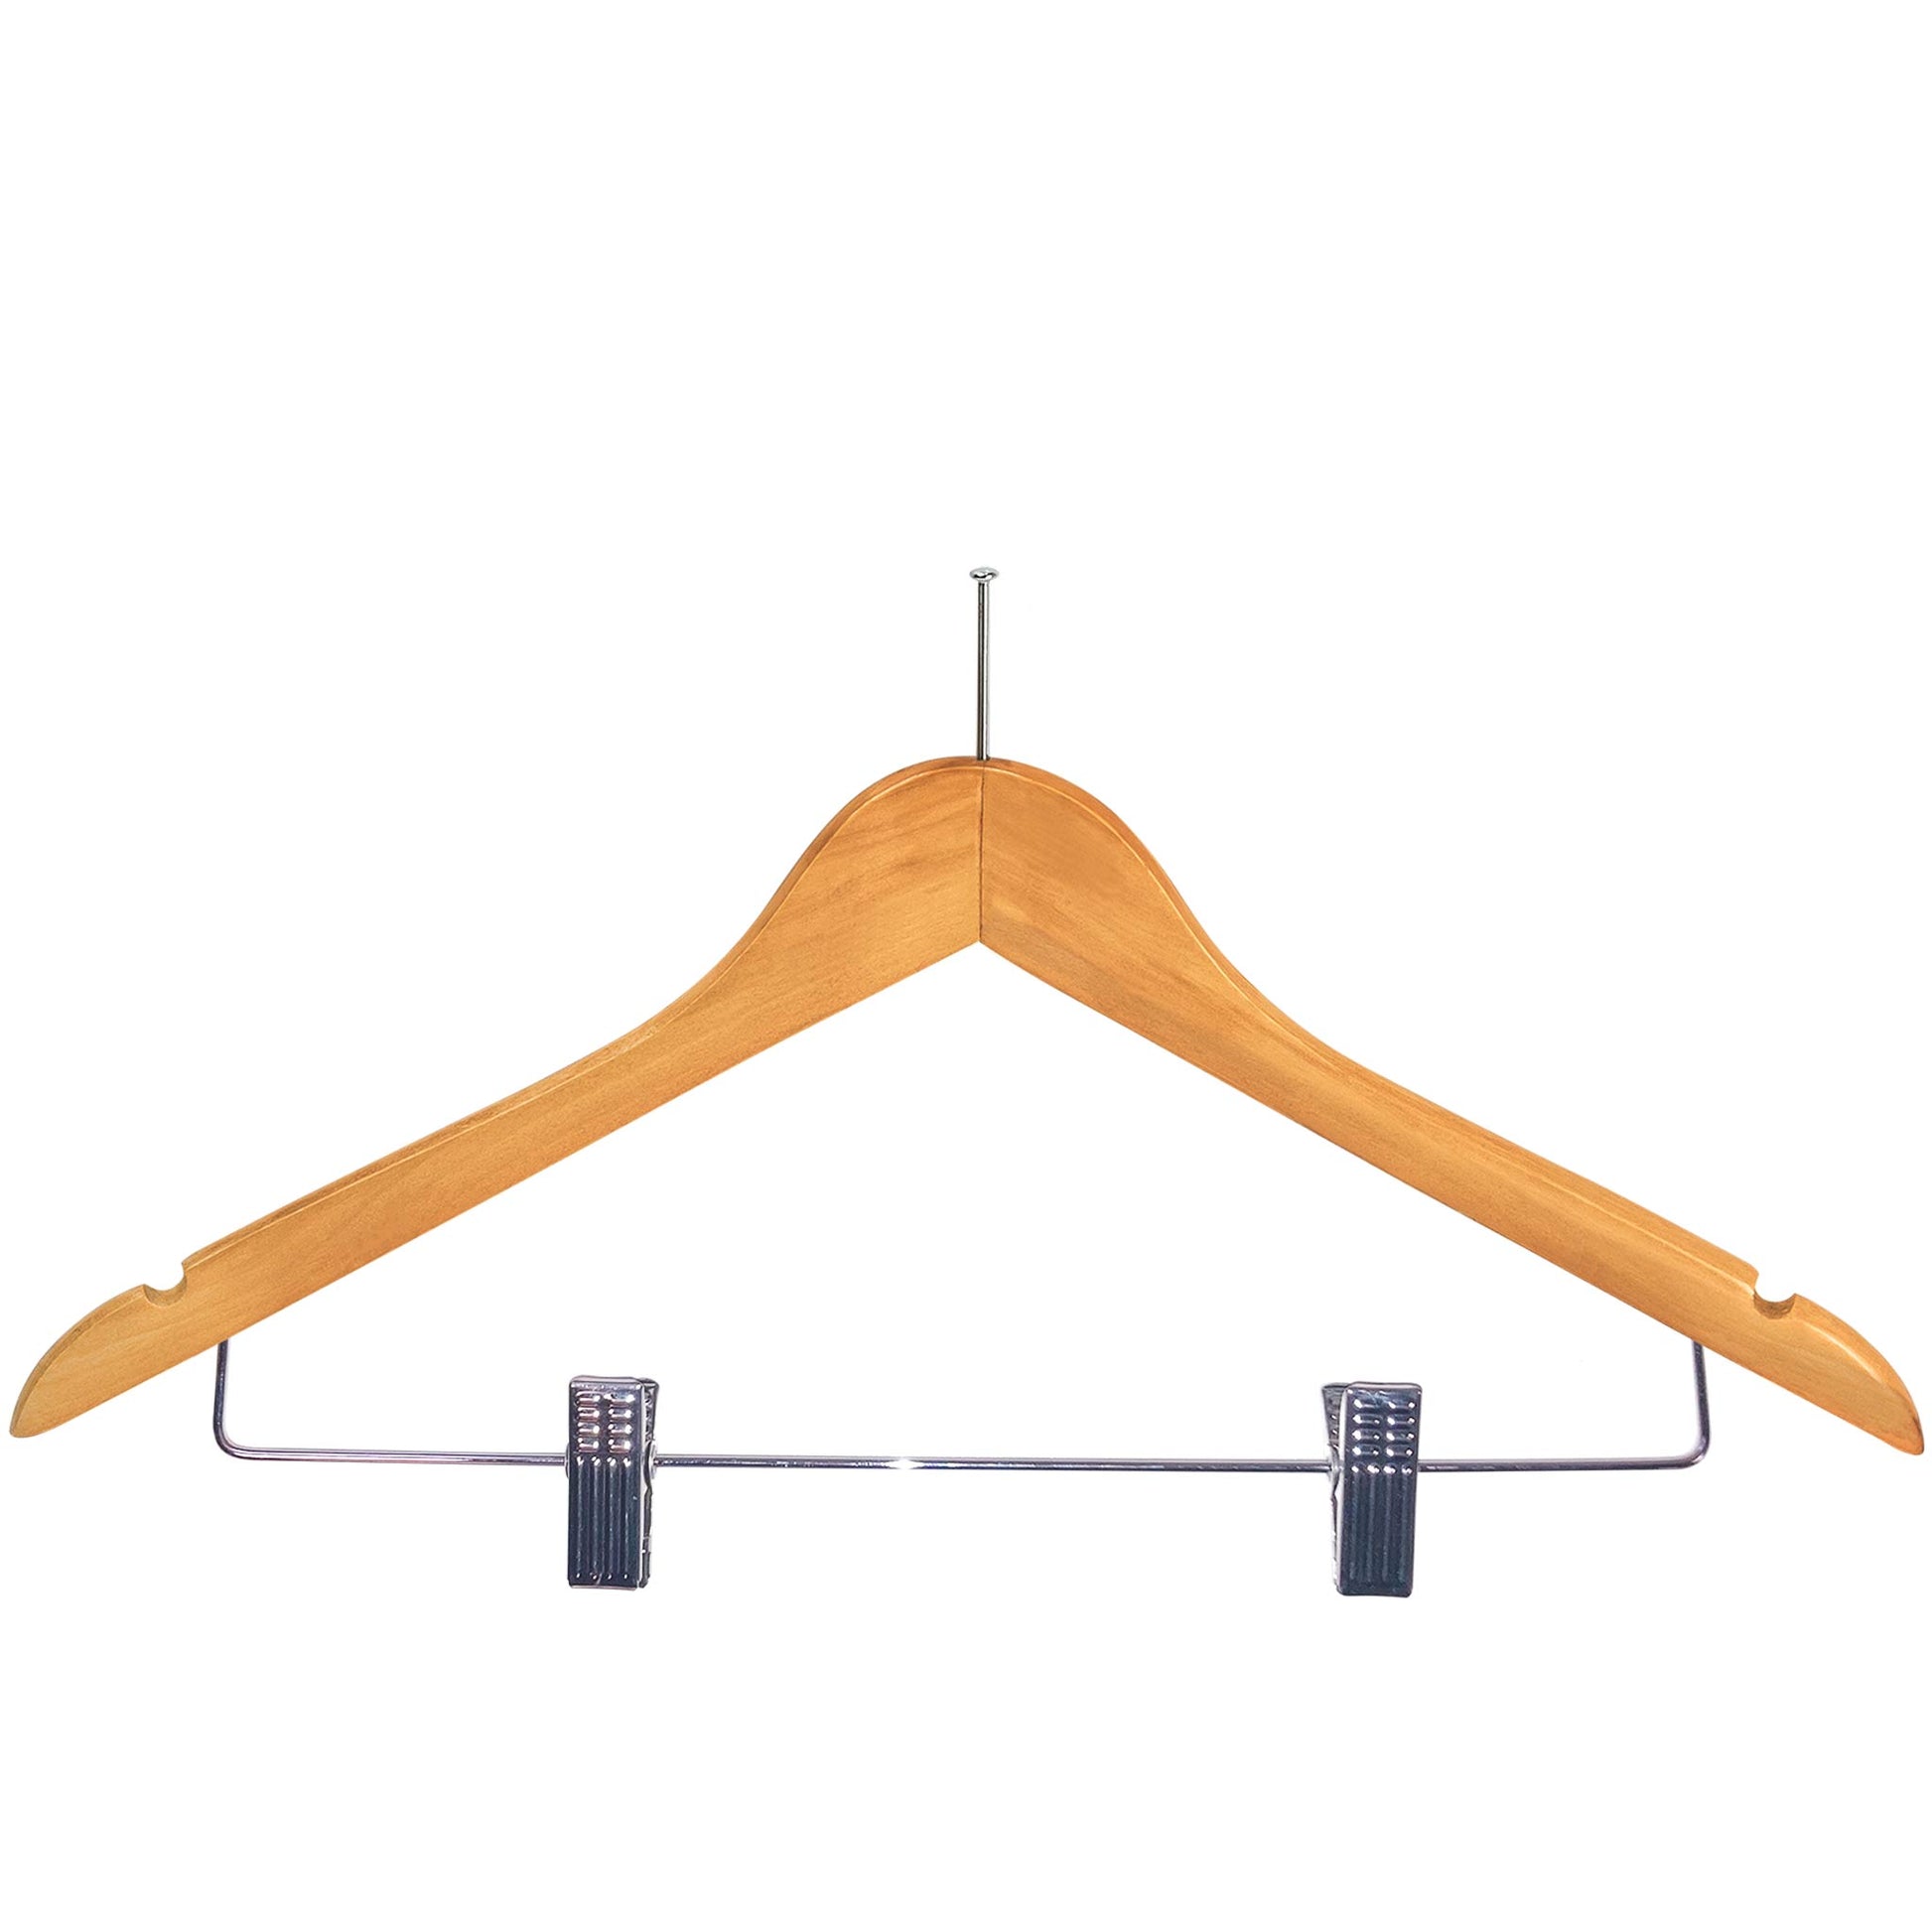 Corby Burlington guest hangers with clips and security pin, light wood